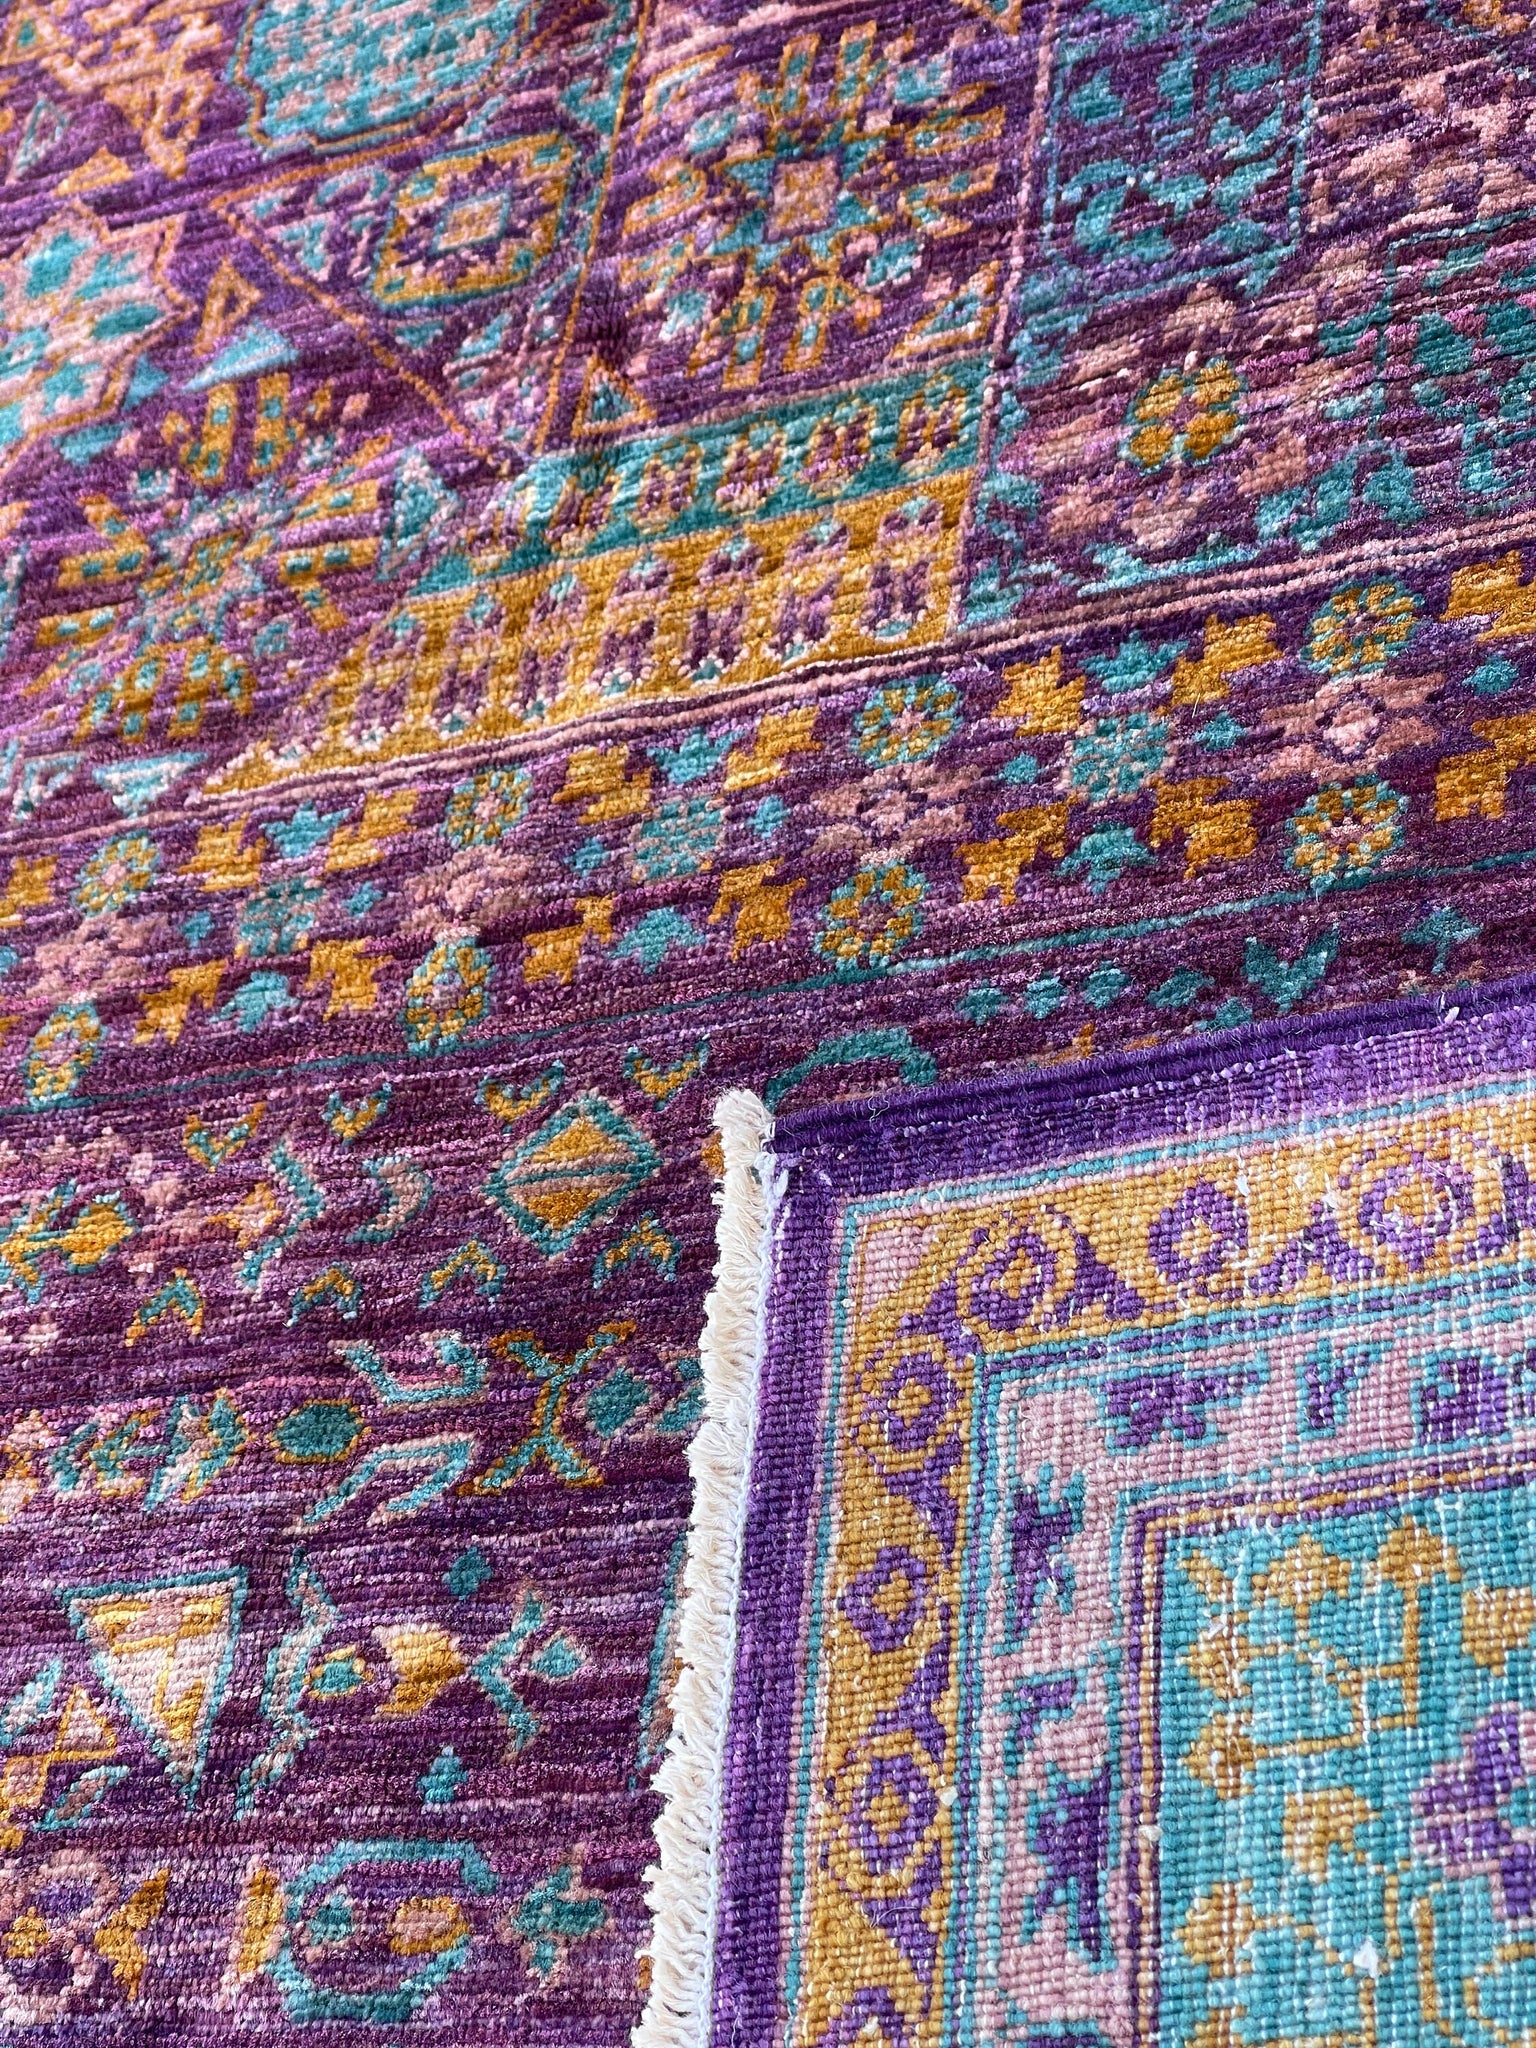 8x10 Authentic Hand-Knotted Afghan Rug | Purple Green Yellow-Gold Teal Lavender Handmade Wool Afghan Rug | Mamluk Wool Traditional Medallion